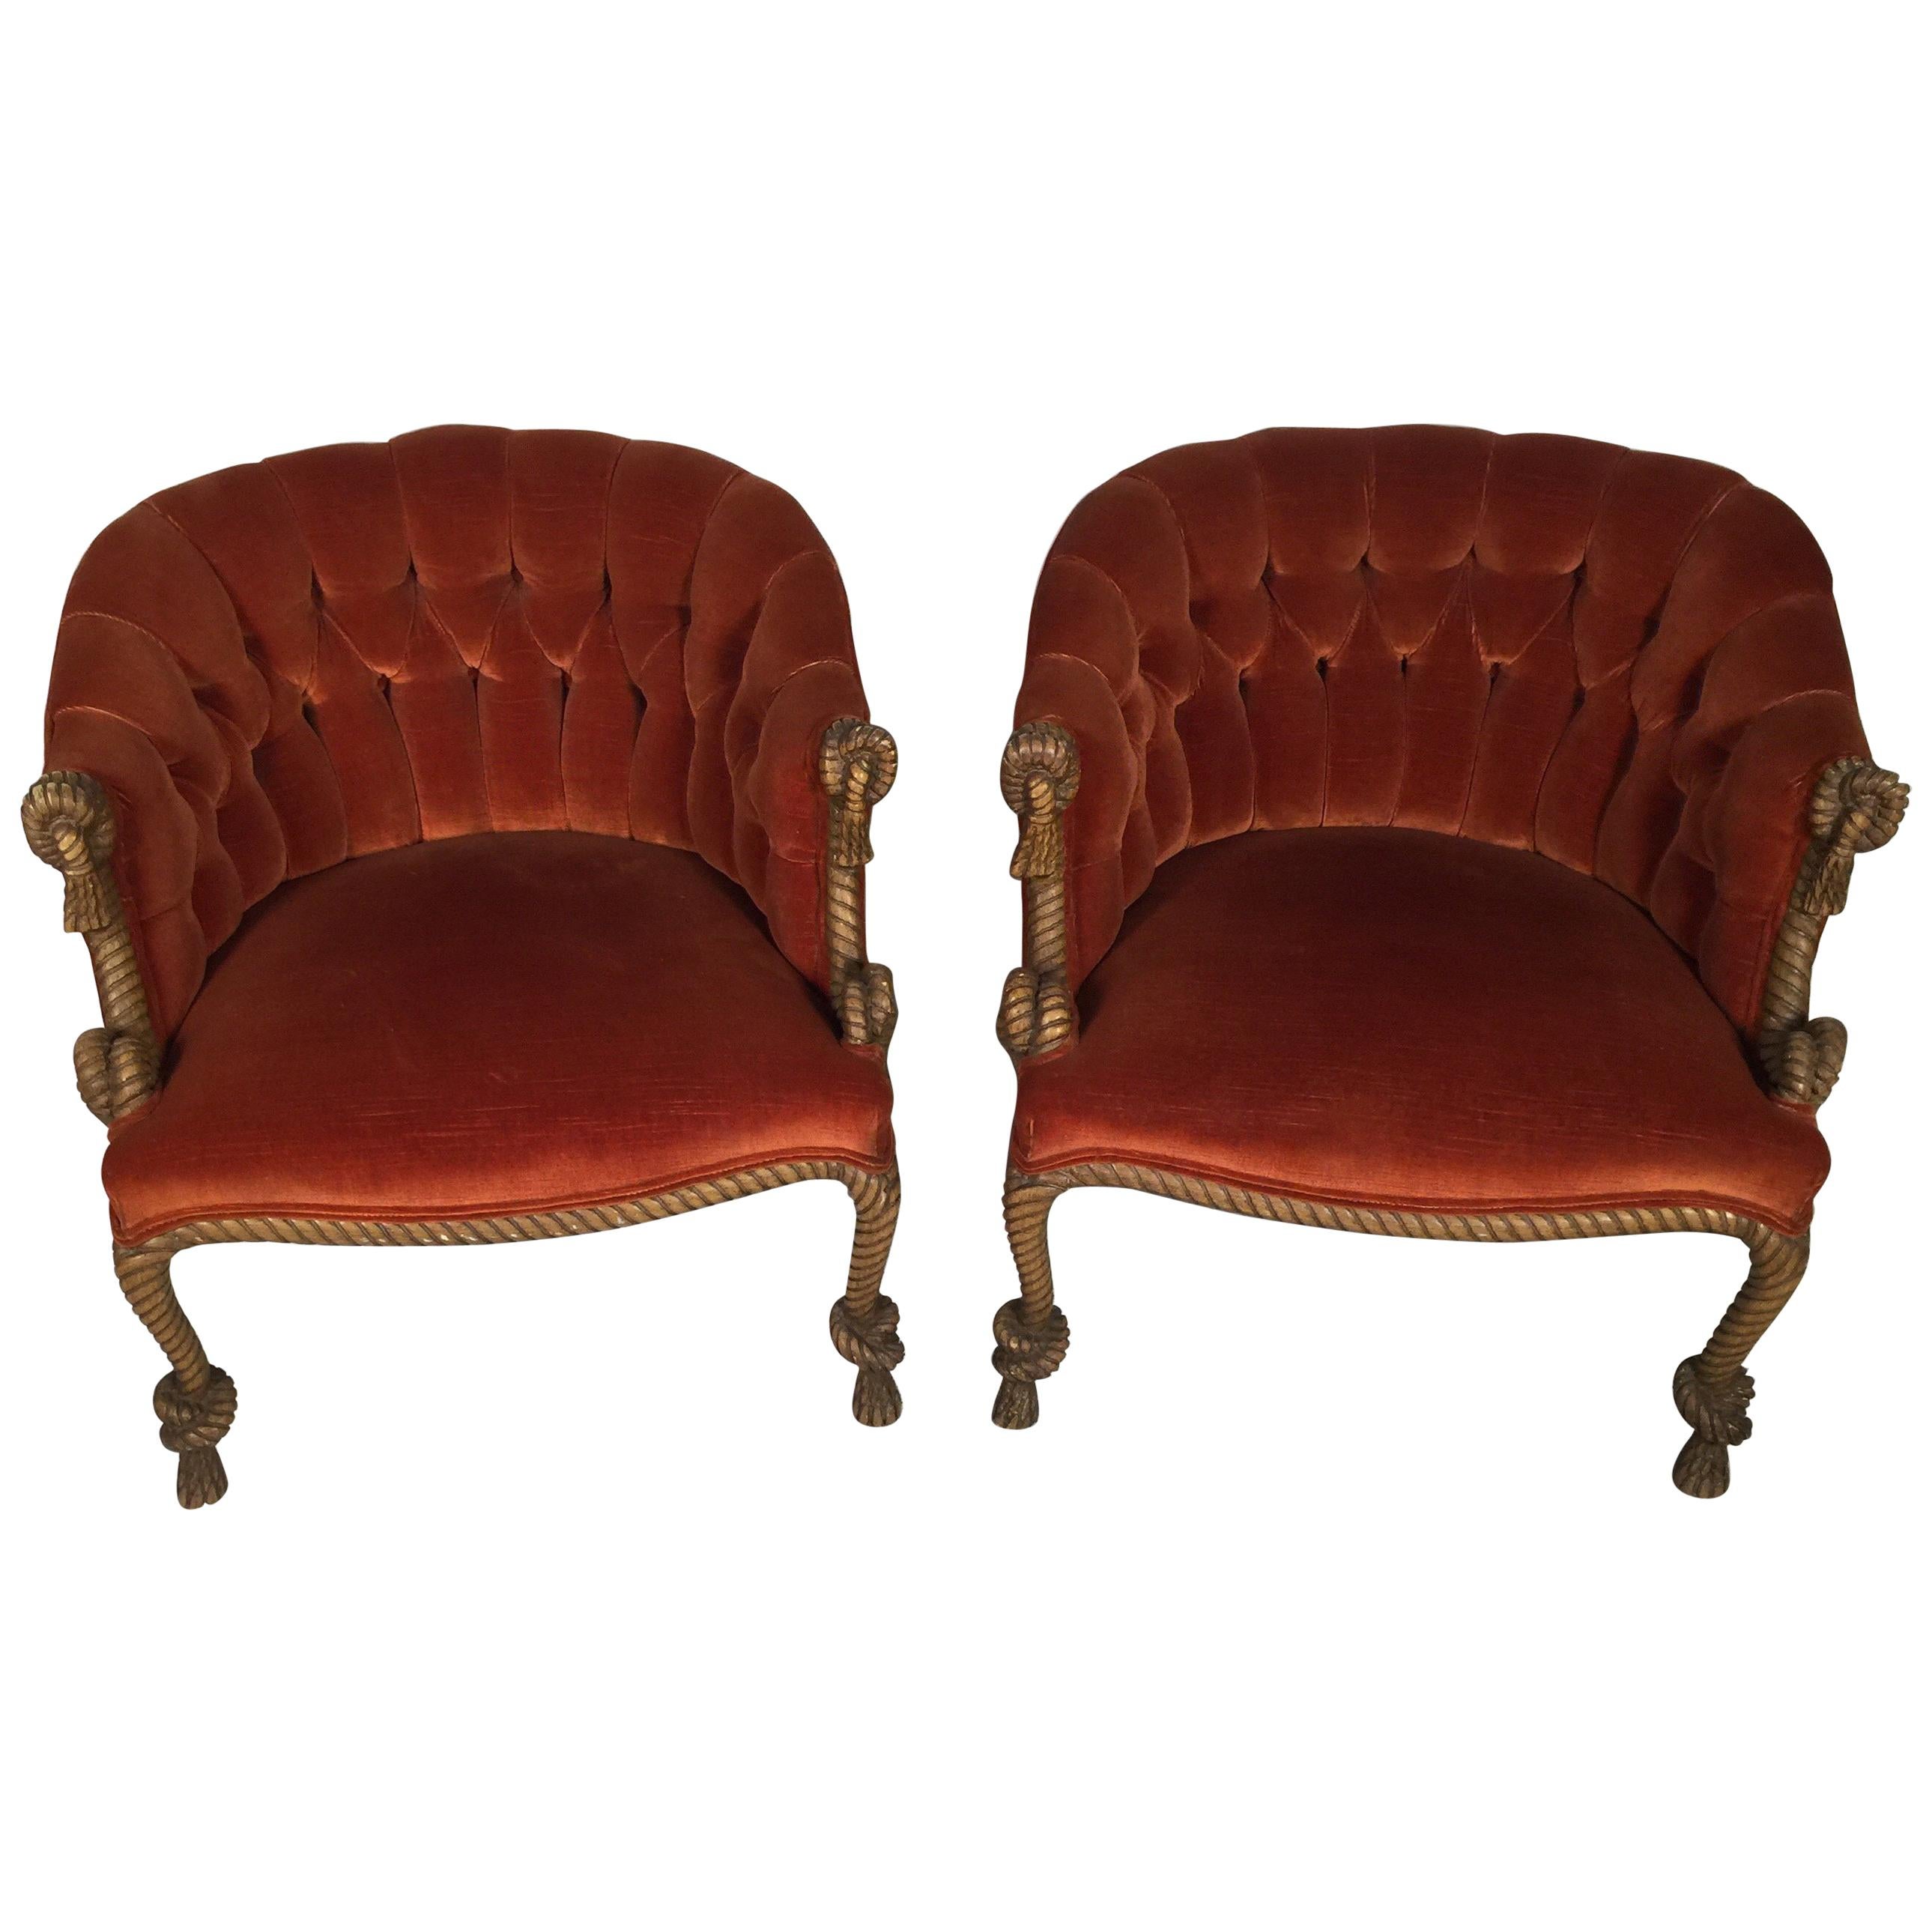 Glamours Pair of Italian Tufted Barrel Back Rope and Tassel Chairs